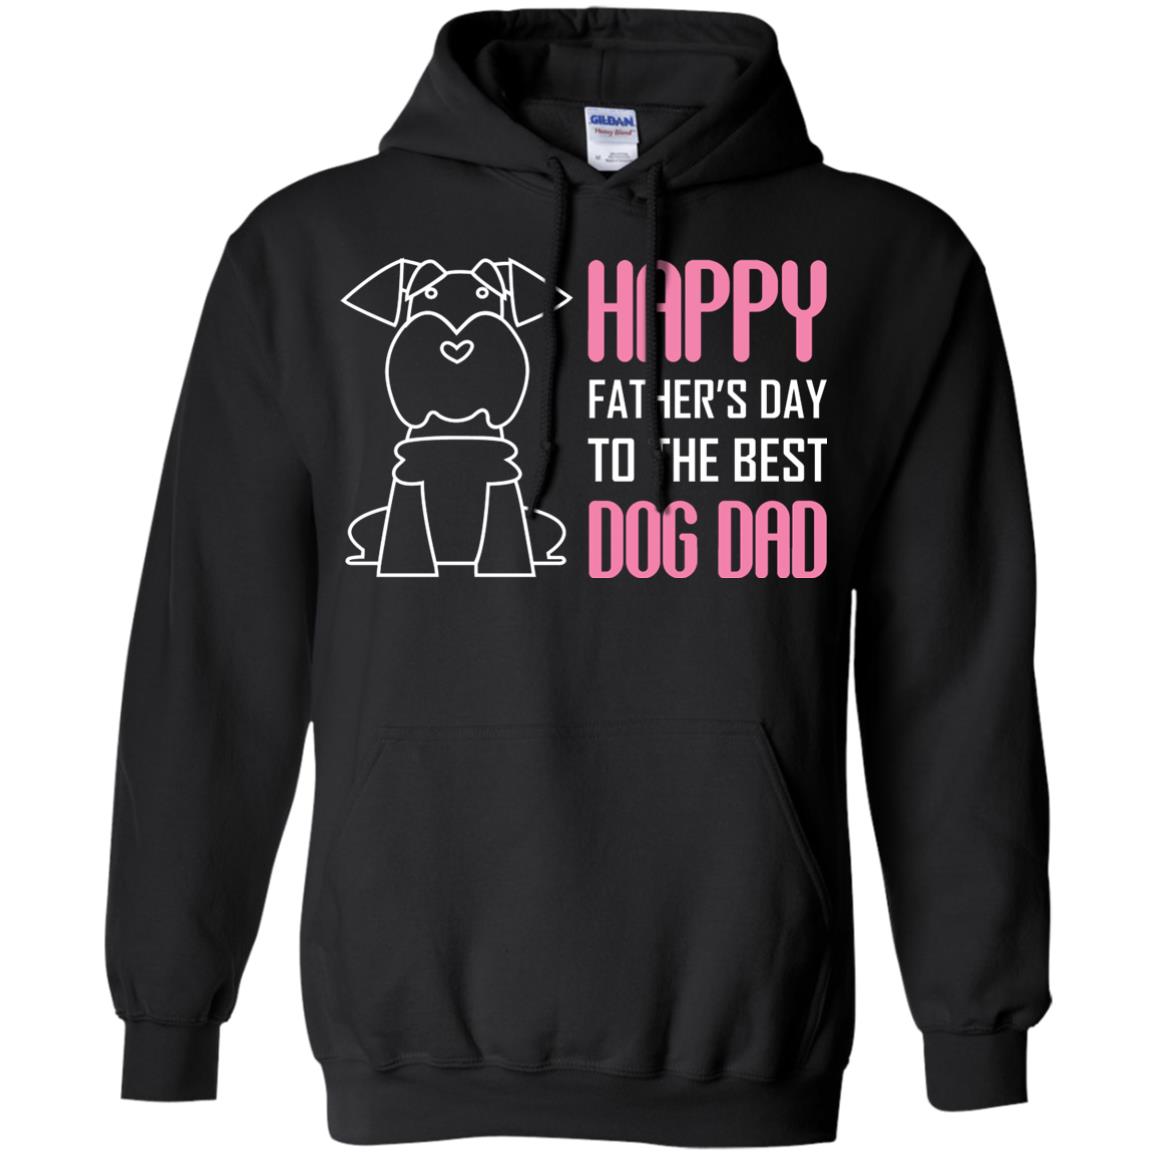 Happy Father's Day To The Best Dog DadG185 Gildan Pullover Hoodie 8 oz.